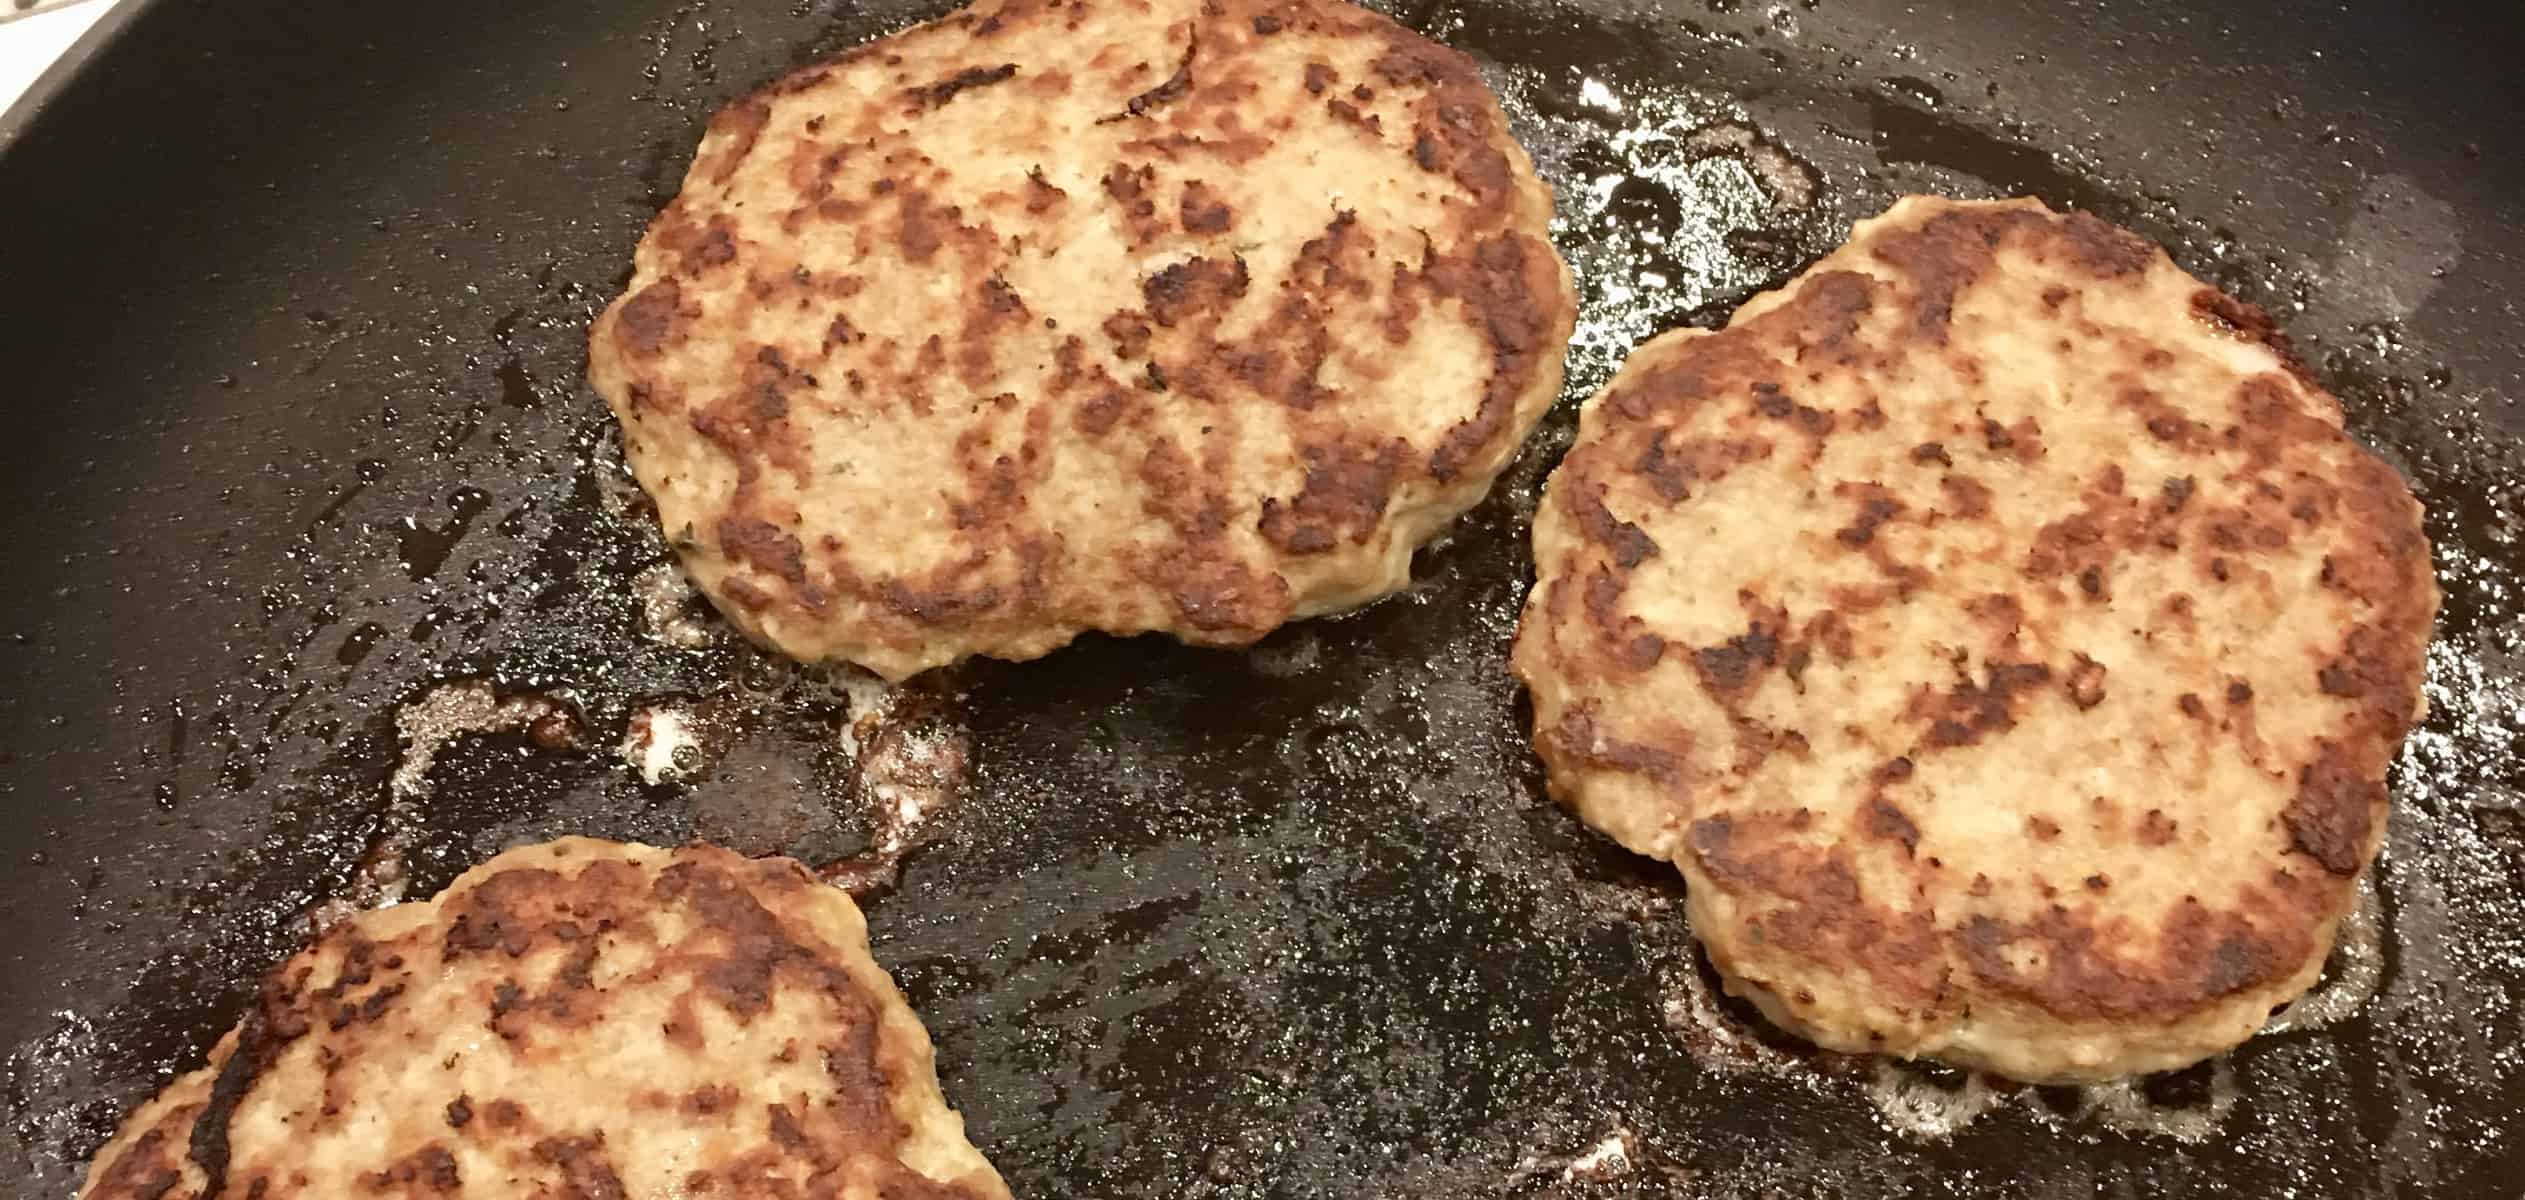 Classic Turkey Burgers on the Stove frying in a frying pan